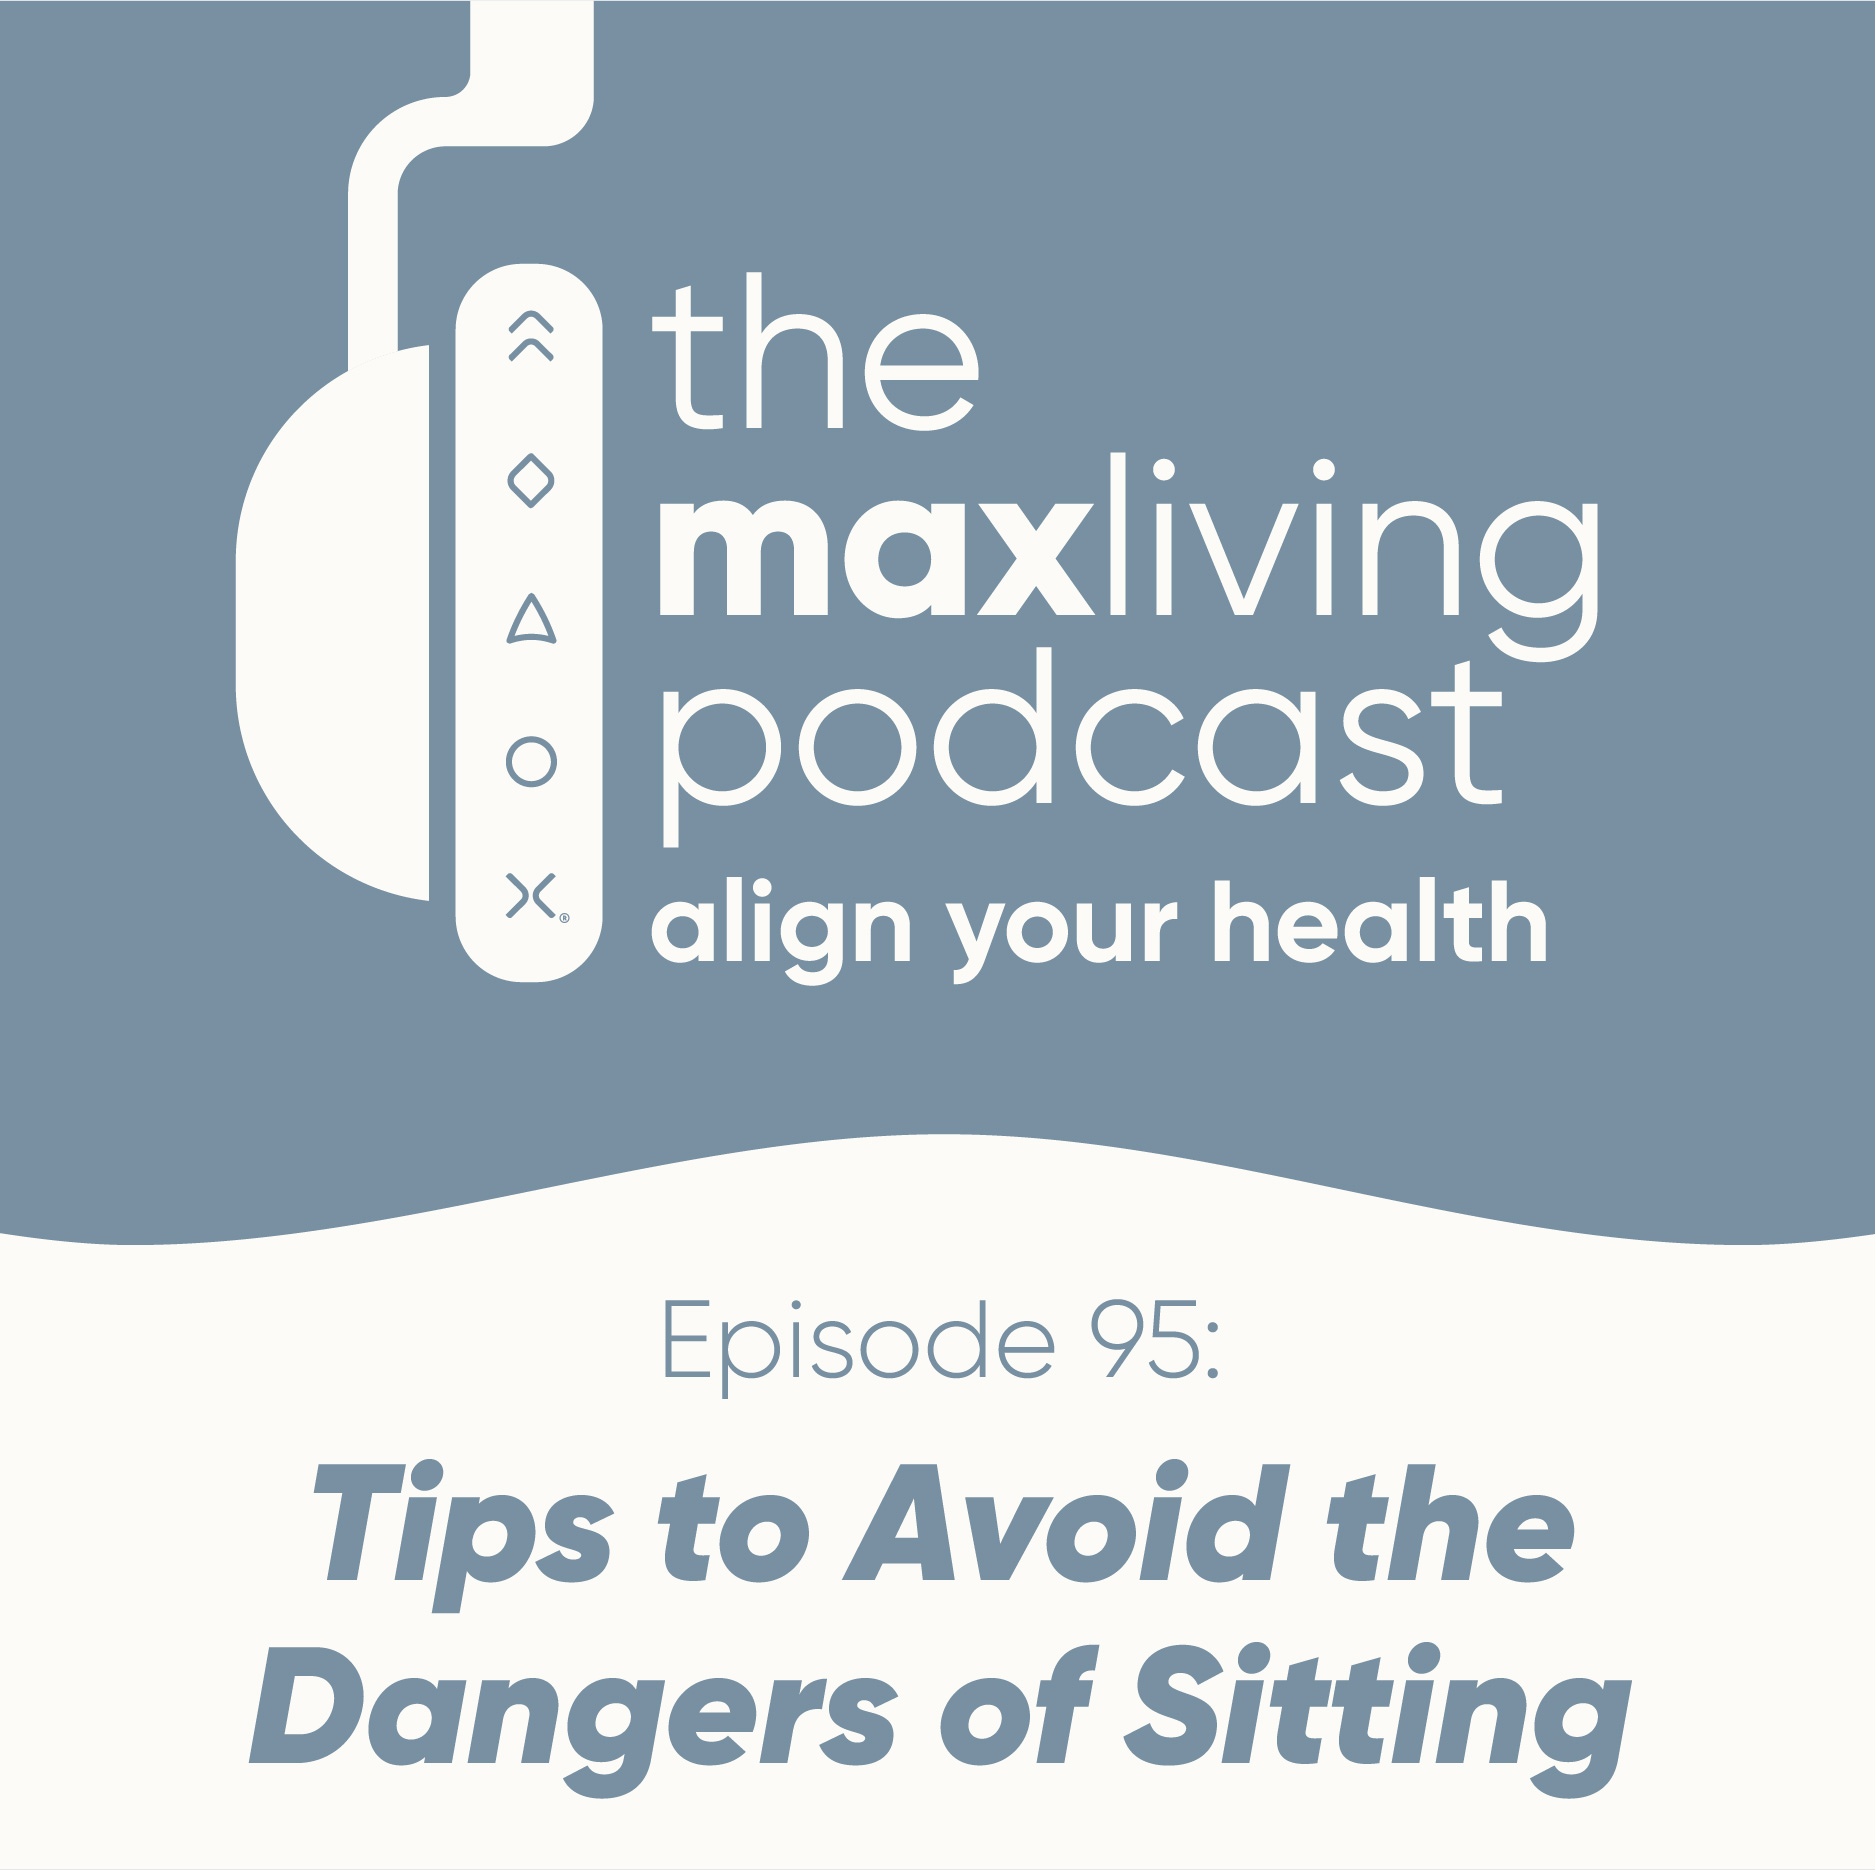 Tips to Avoid the Dangers of Sitting